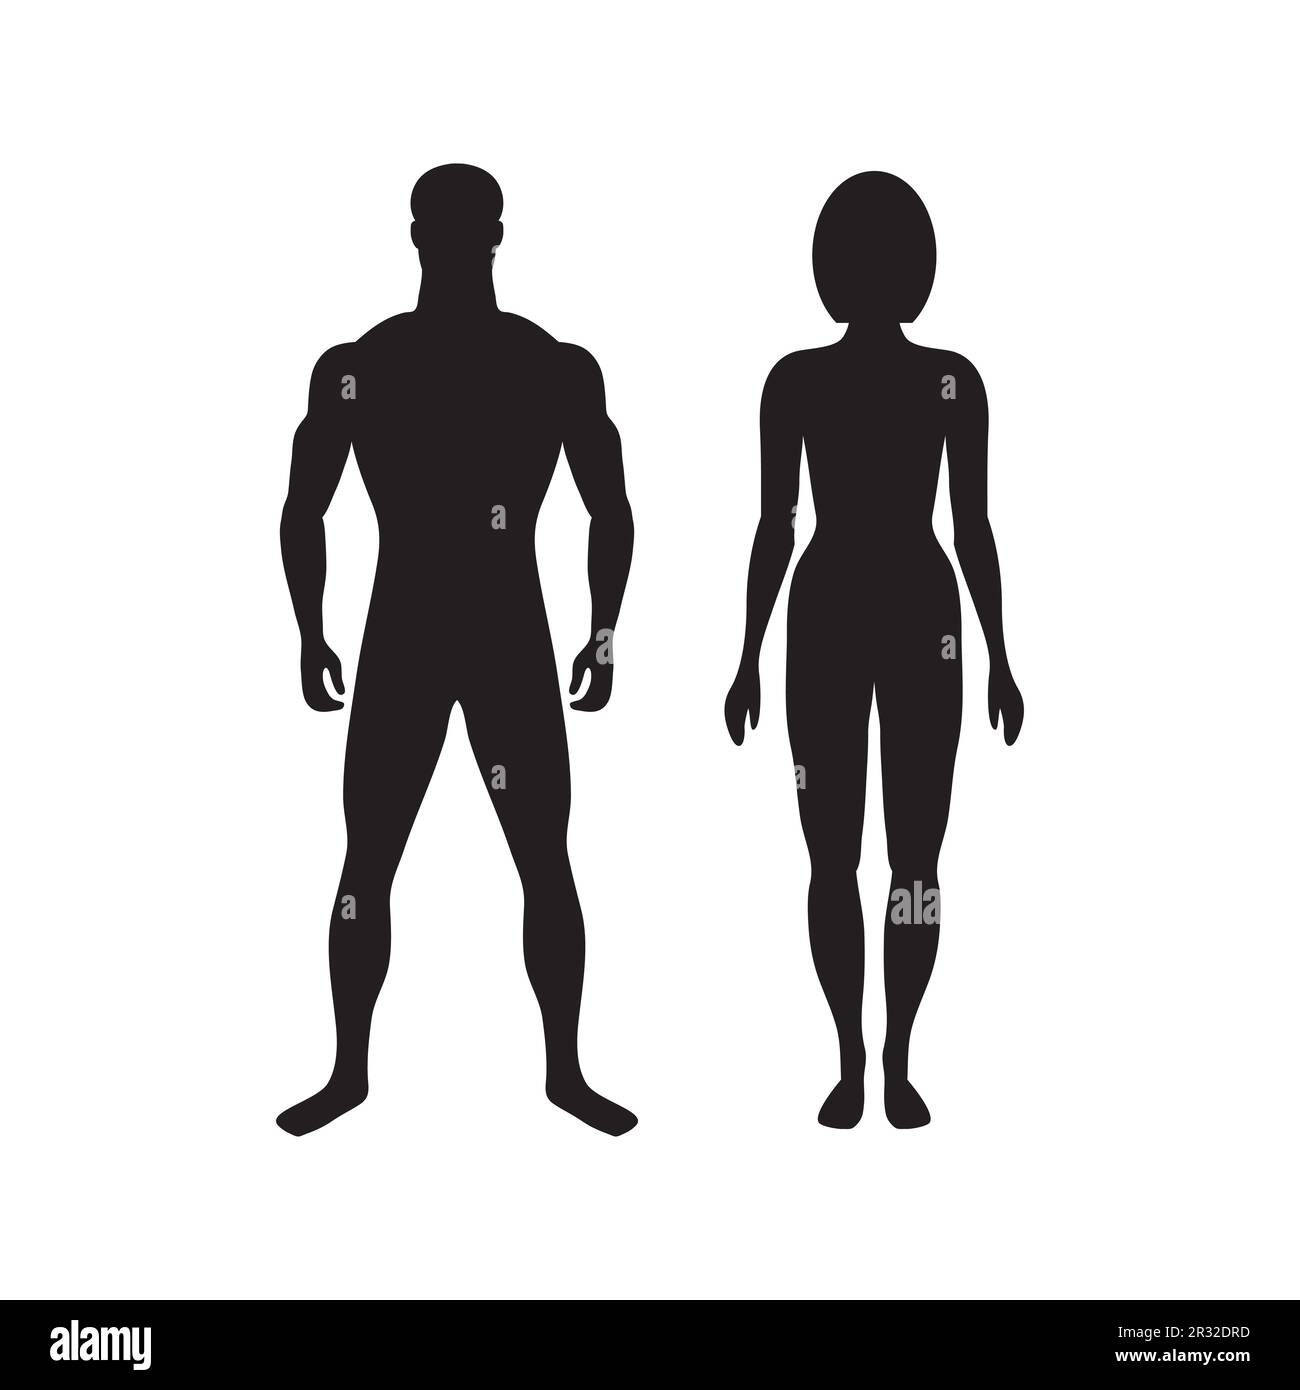 Male and female figures. Gentleman and lady. Impersonal characters of proportional physique. Young couple. Outlines of strong healthy human bodies. Po Stock Vector